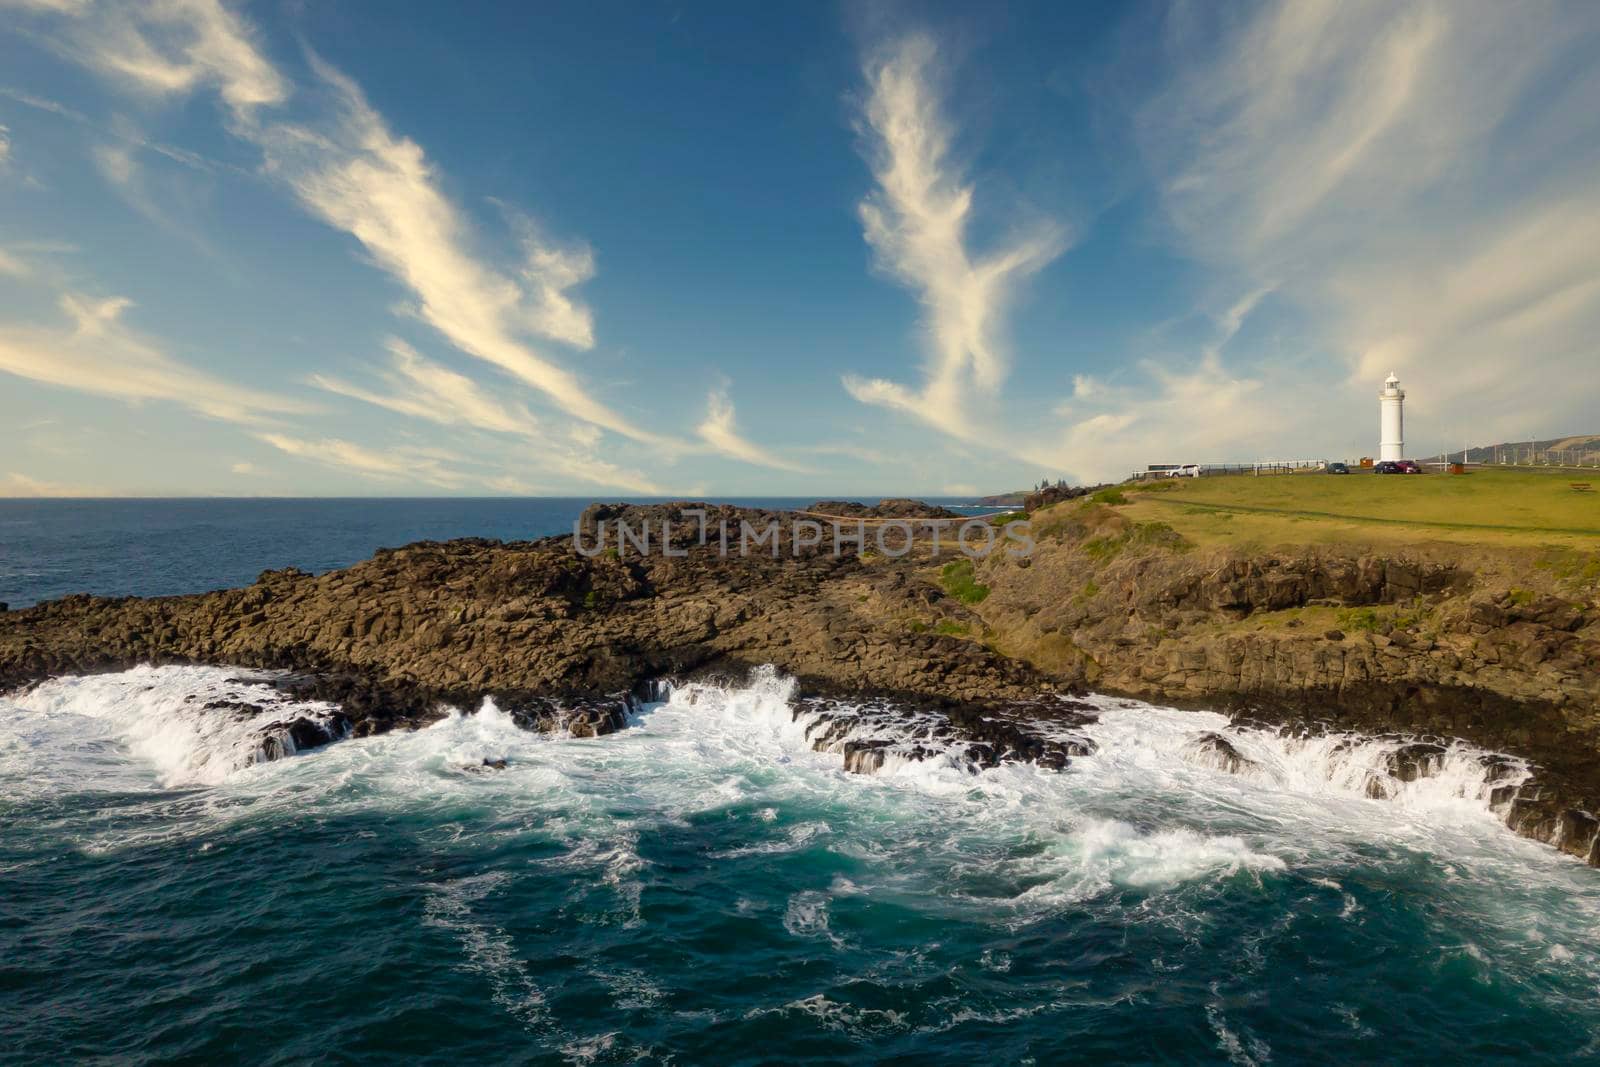 Drone aerial photograph of the Lighthouse at Kiama by WittkePhotos